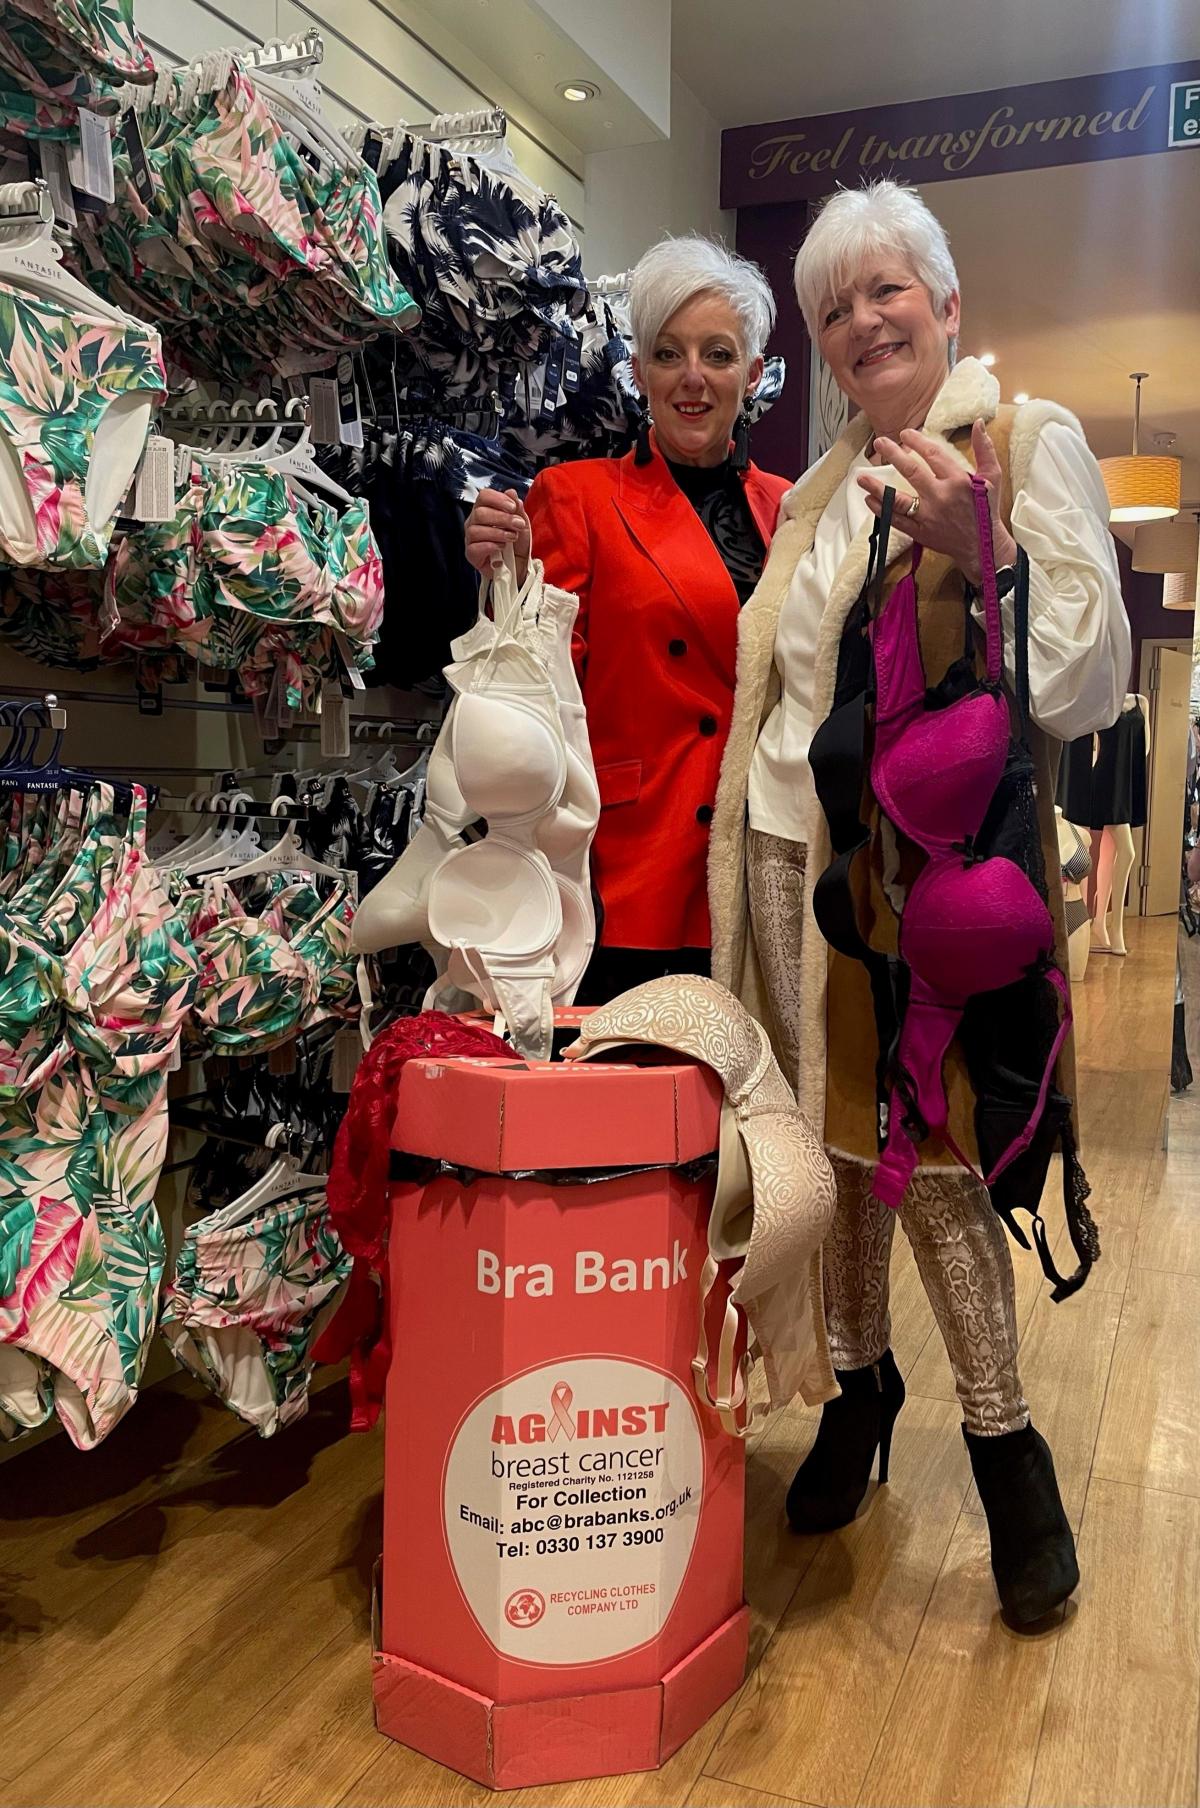 Women donate bras to Leia bra bank in aid of cancer charity